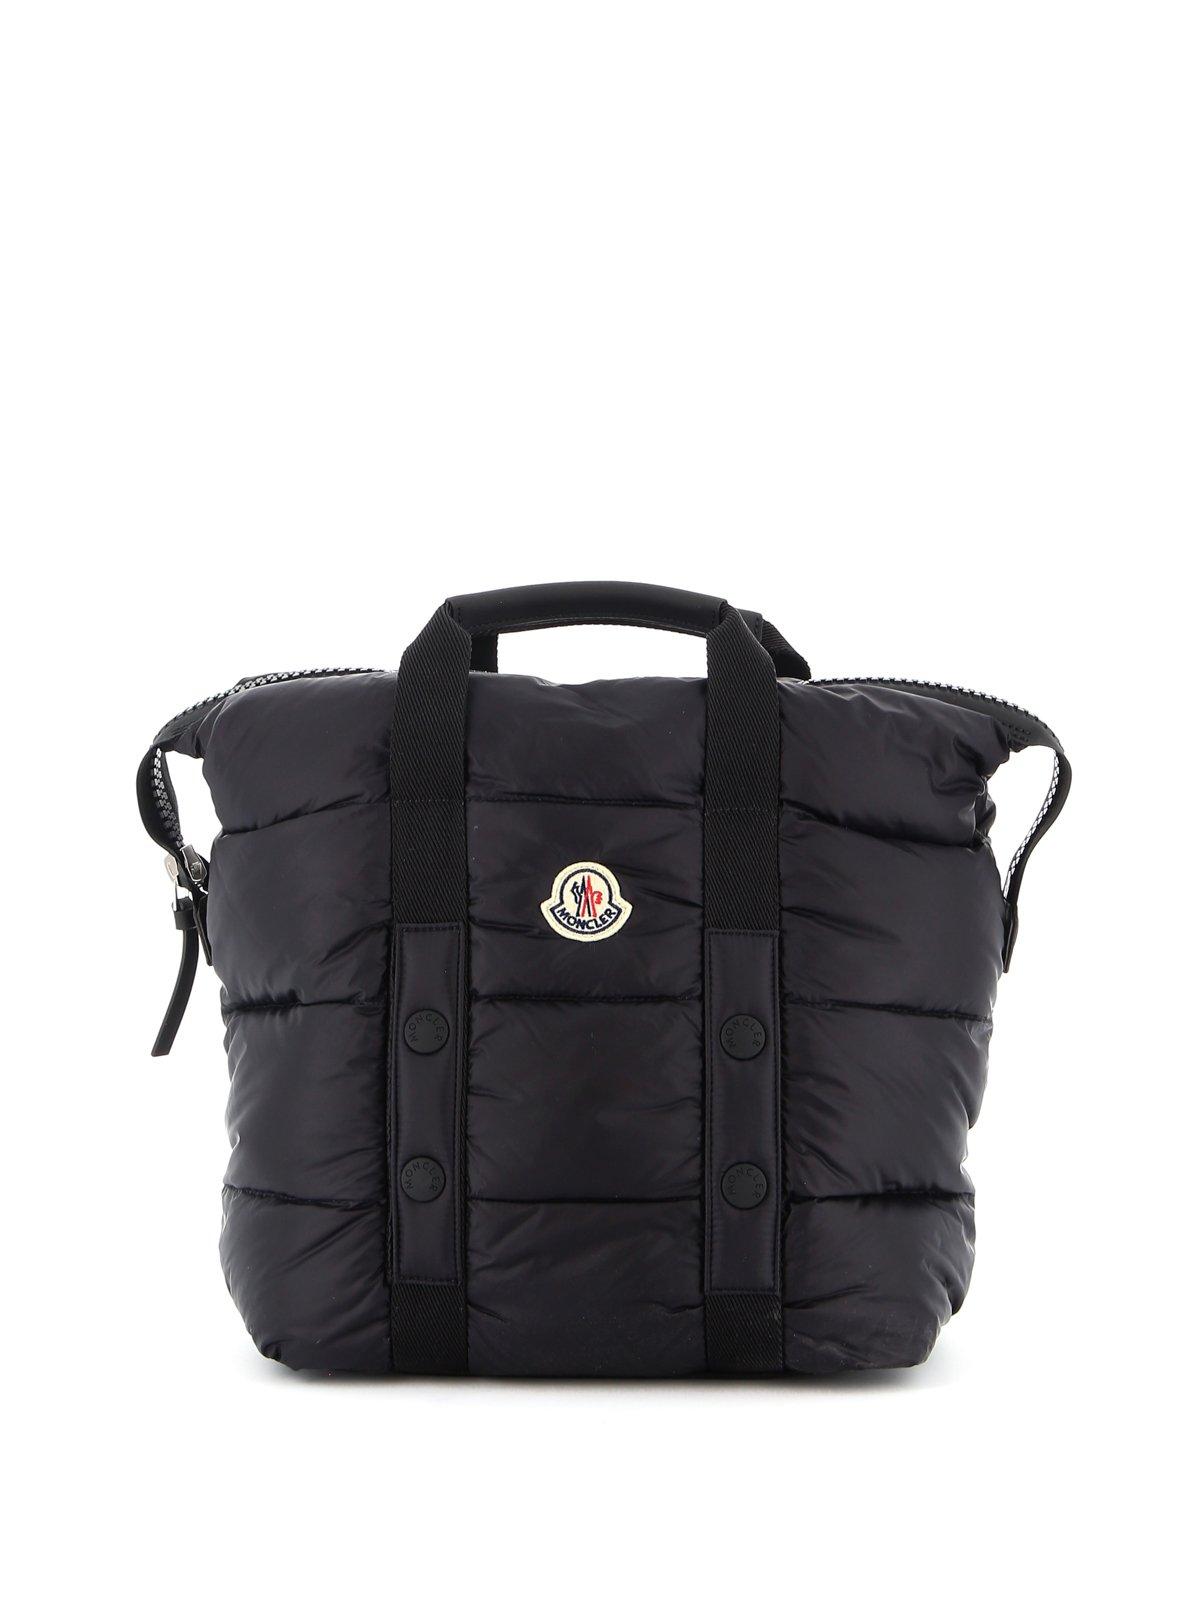 Moncler Synthetic Logo Padded Tote Bag in Black - Lyst